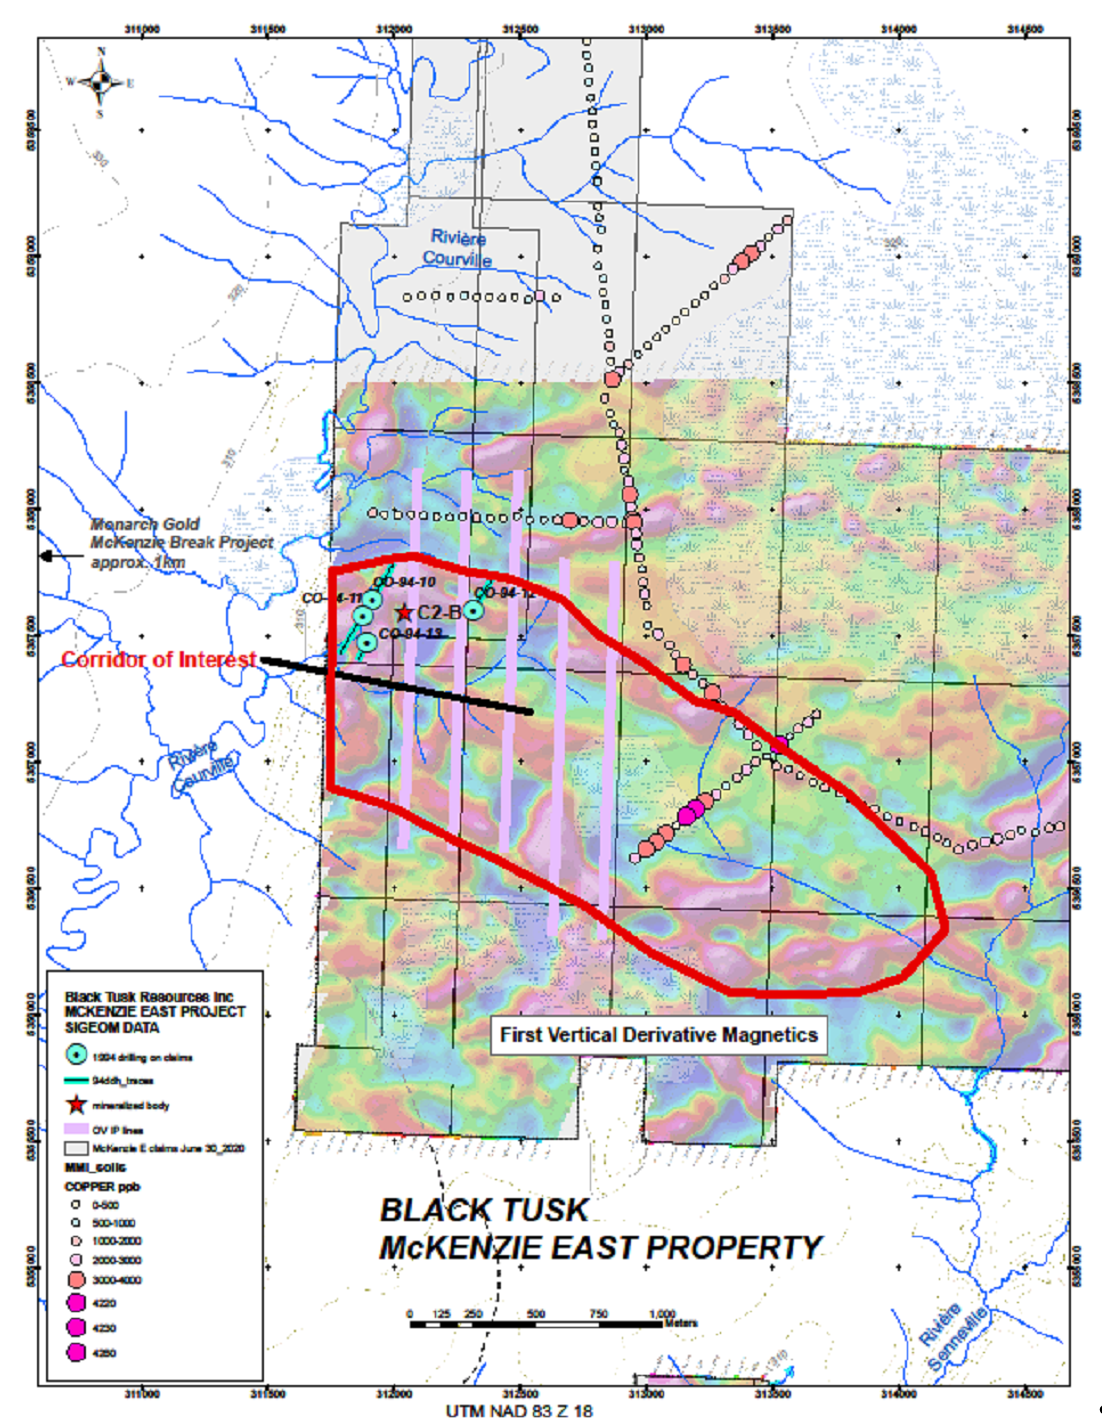 Black Tusk Resources Inc, Monday, August 24, 2020, Press release picture